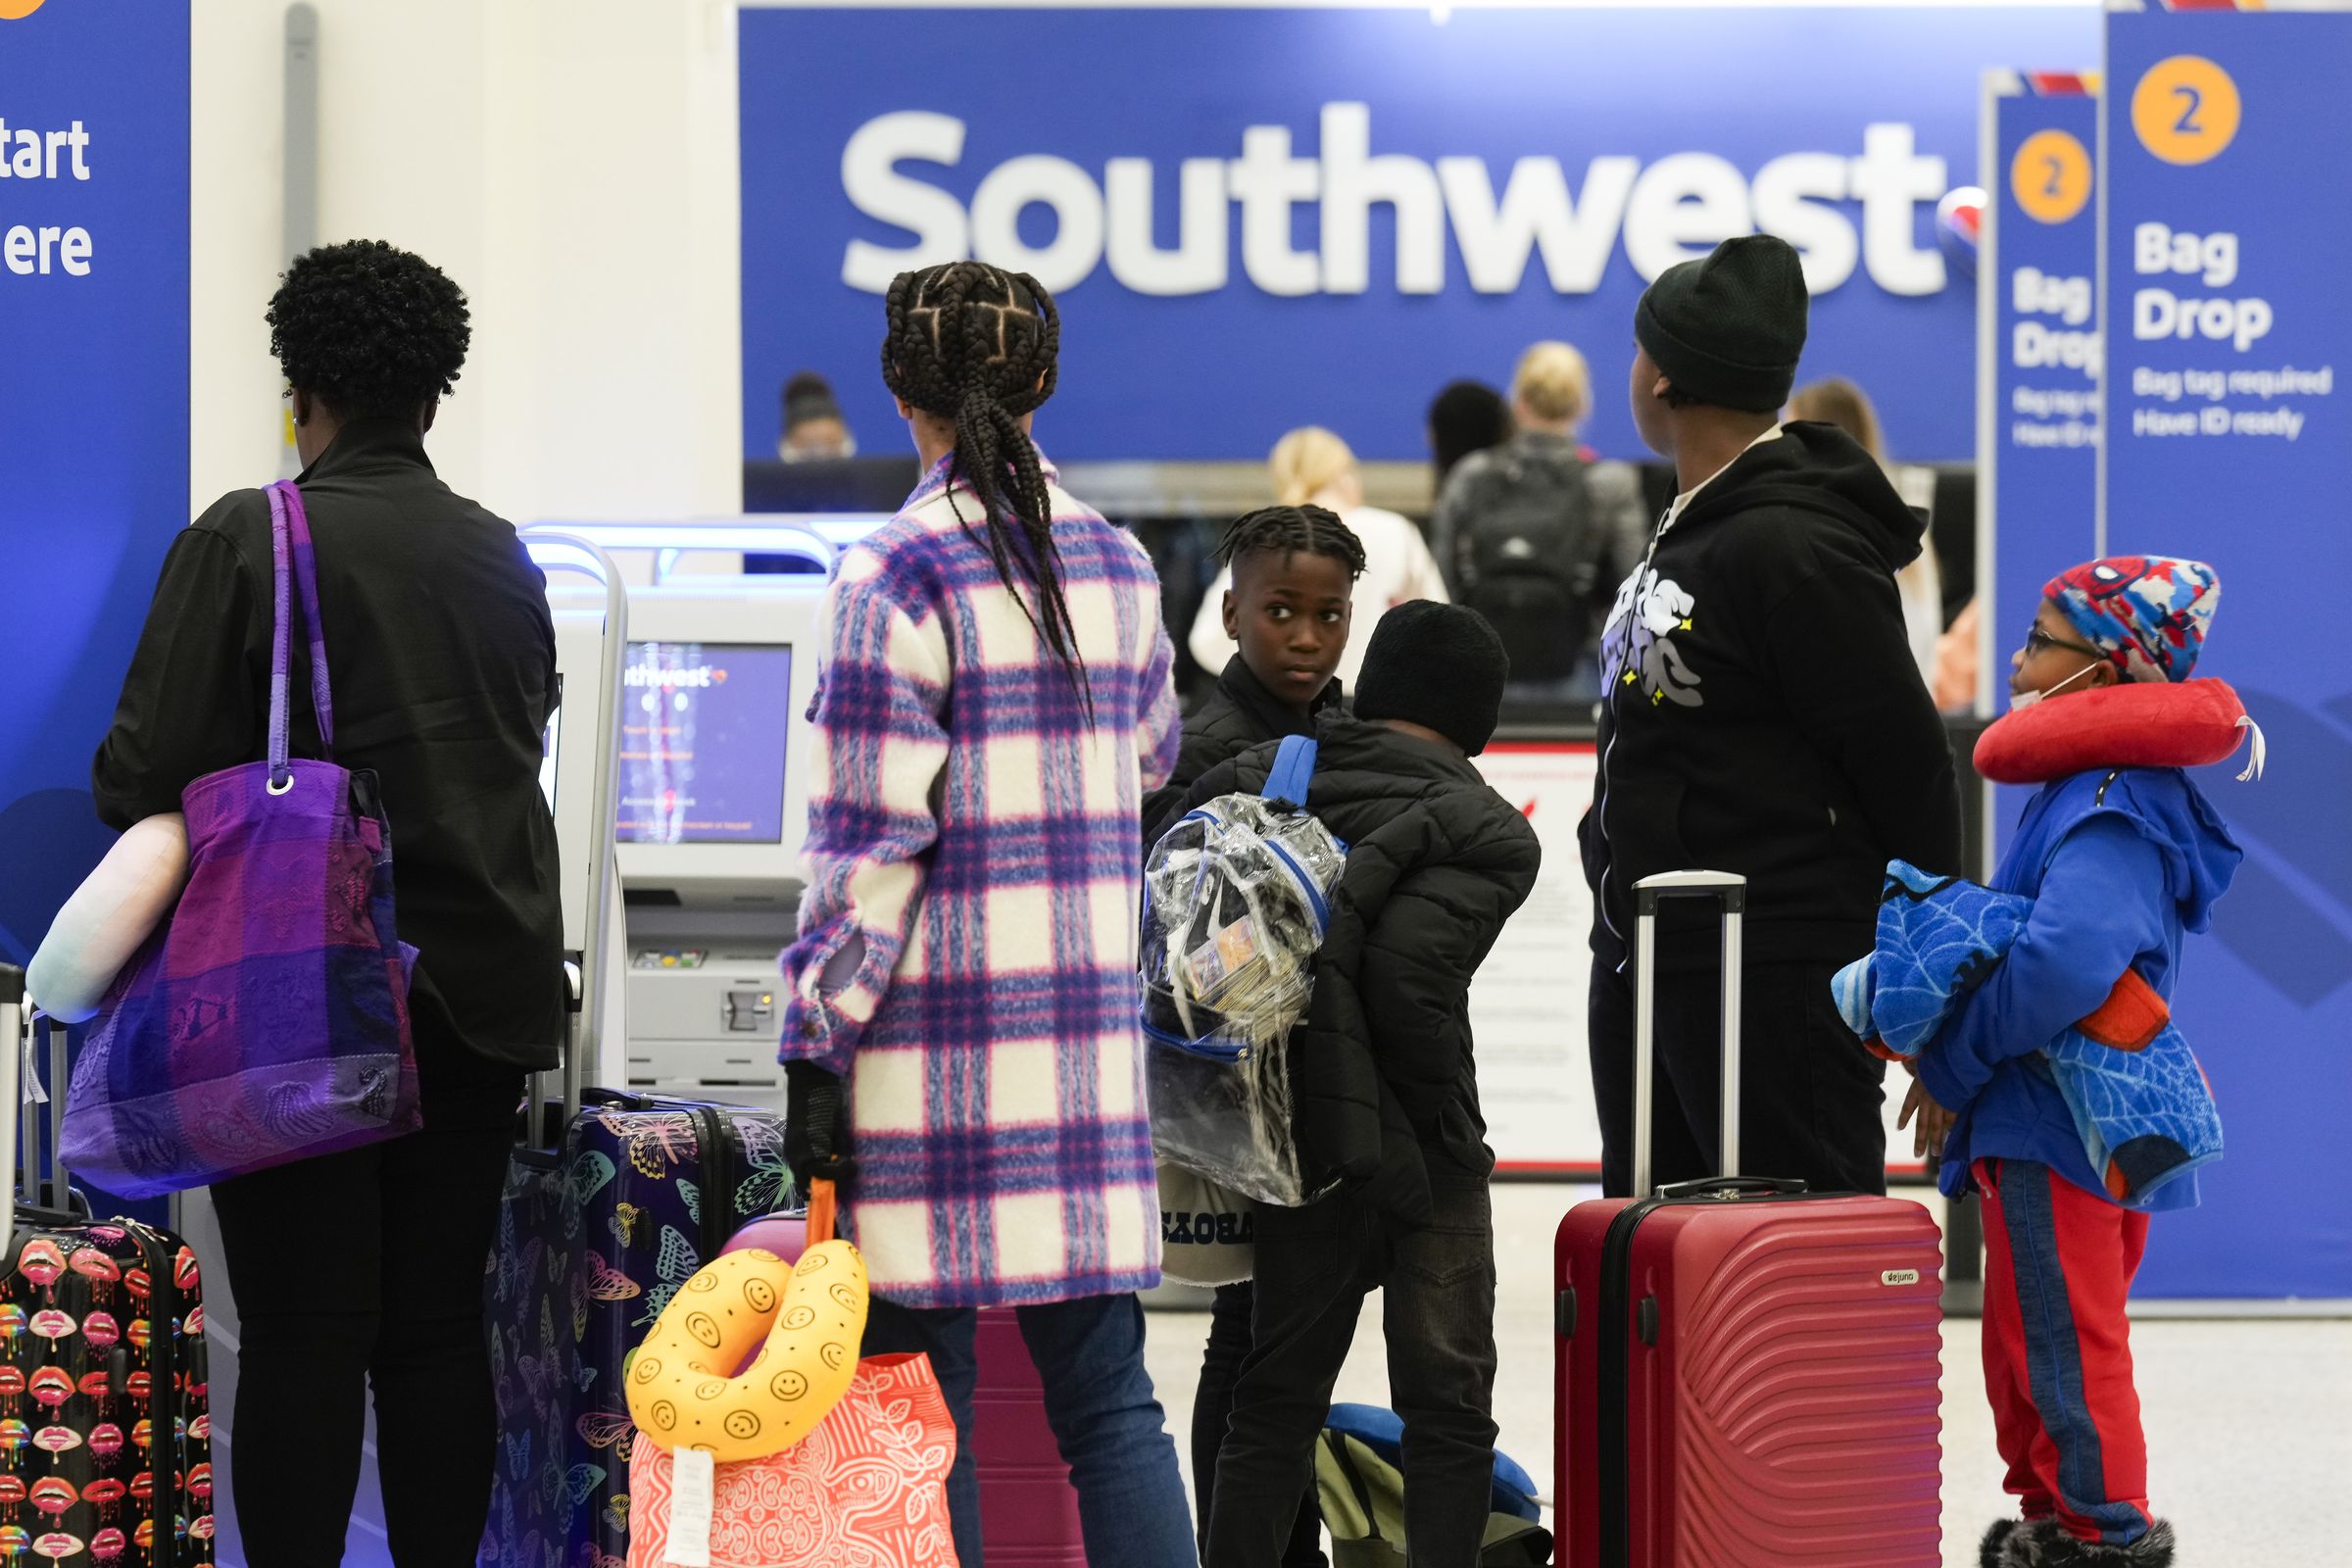 Southwest Airlines passengers at an airport in Texas